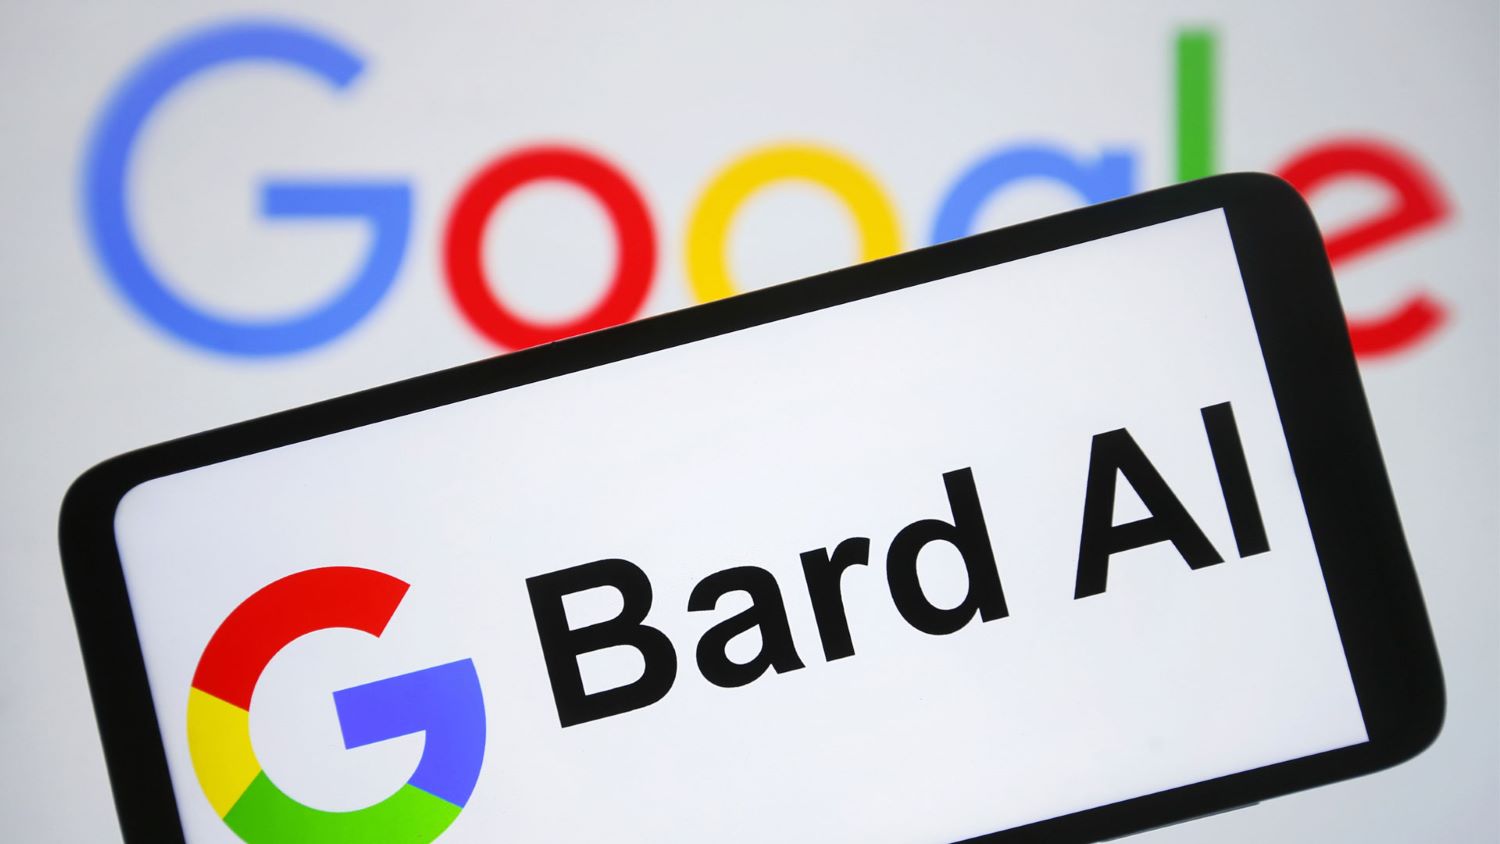 Google Announces Exciting Integration of Bard with Gmail and YouTube in Latest Upgrade